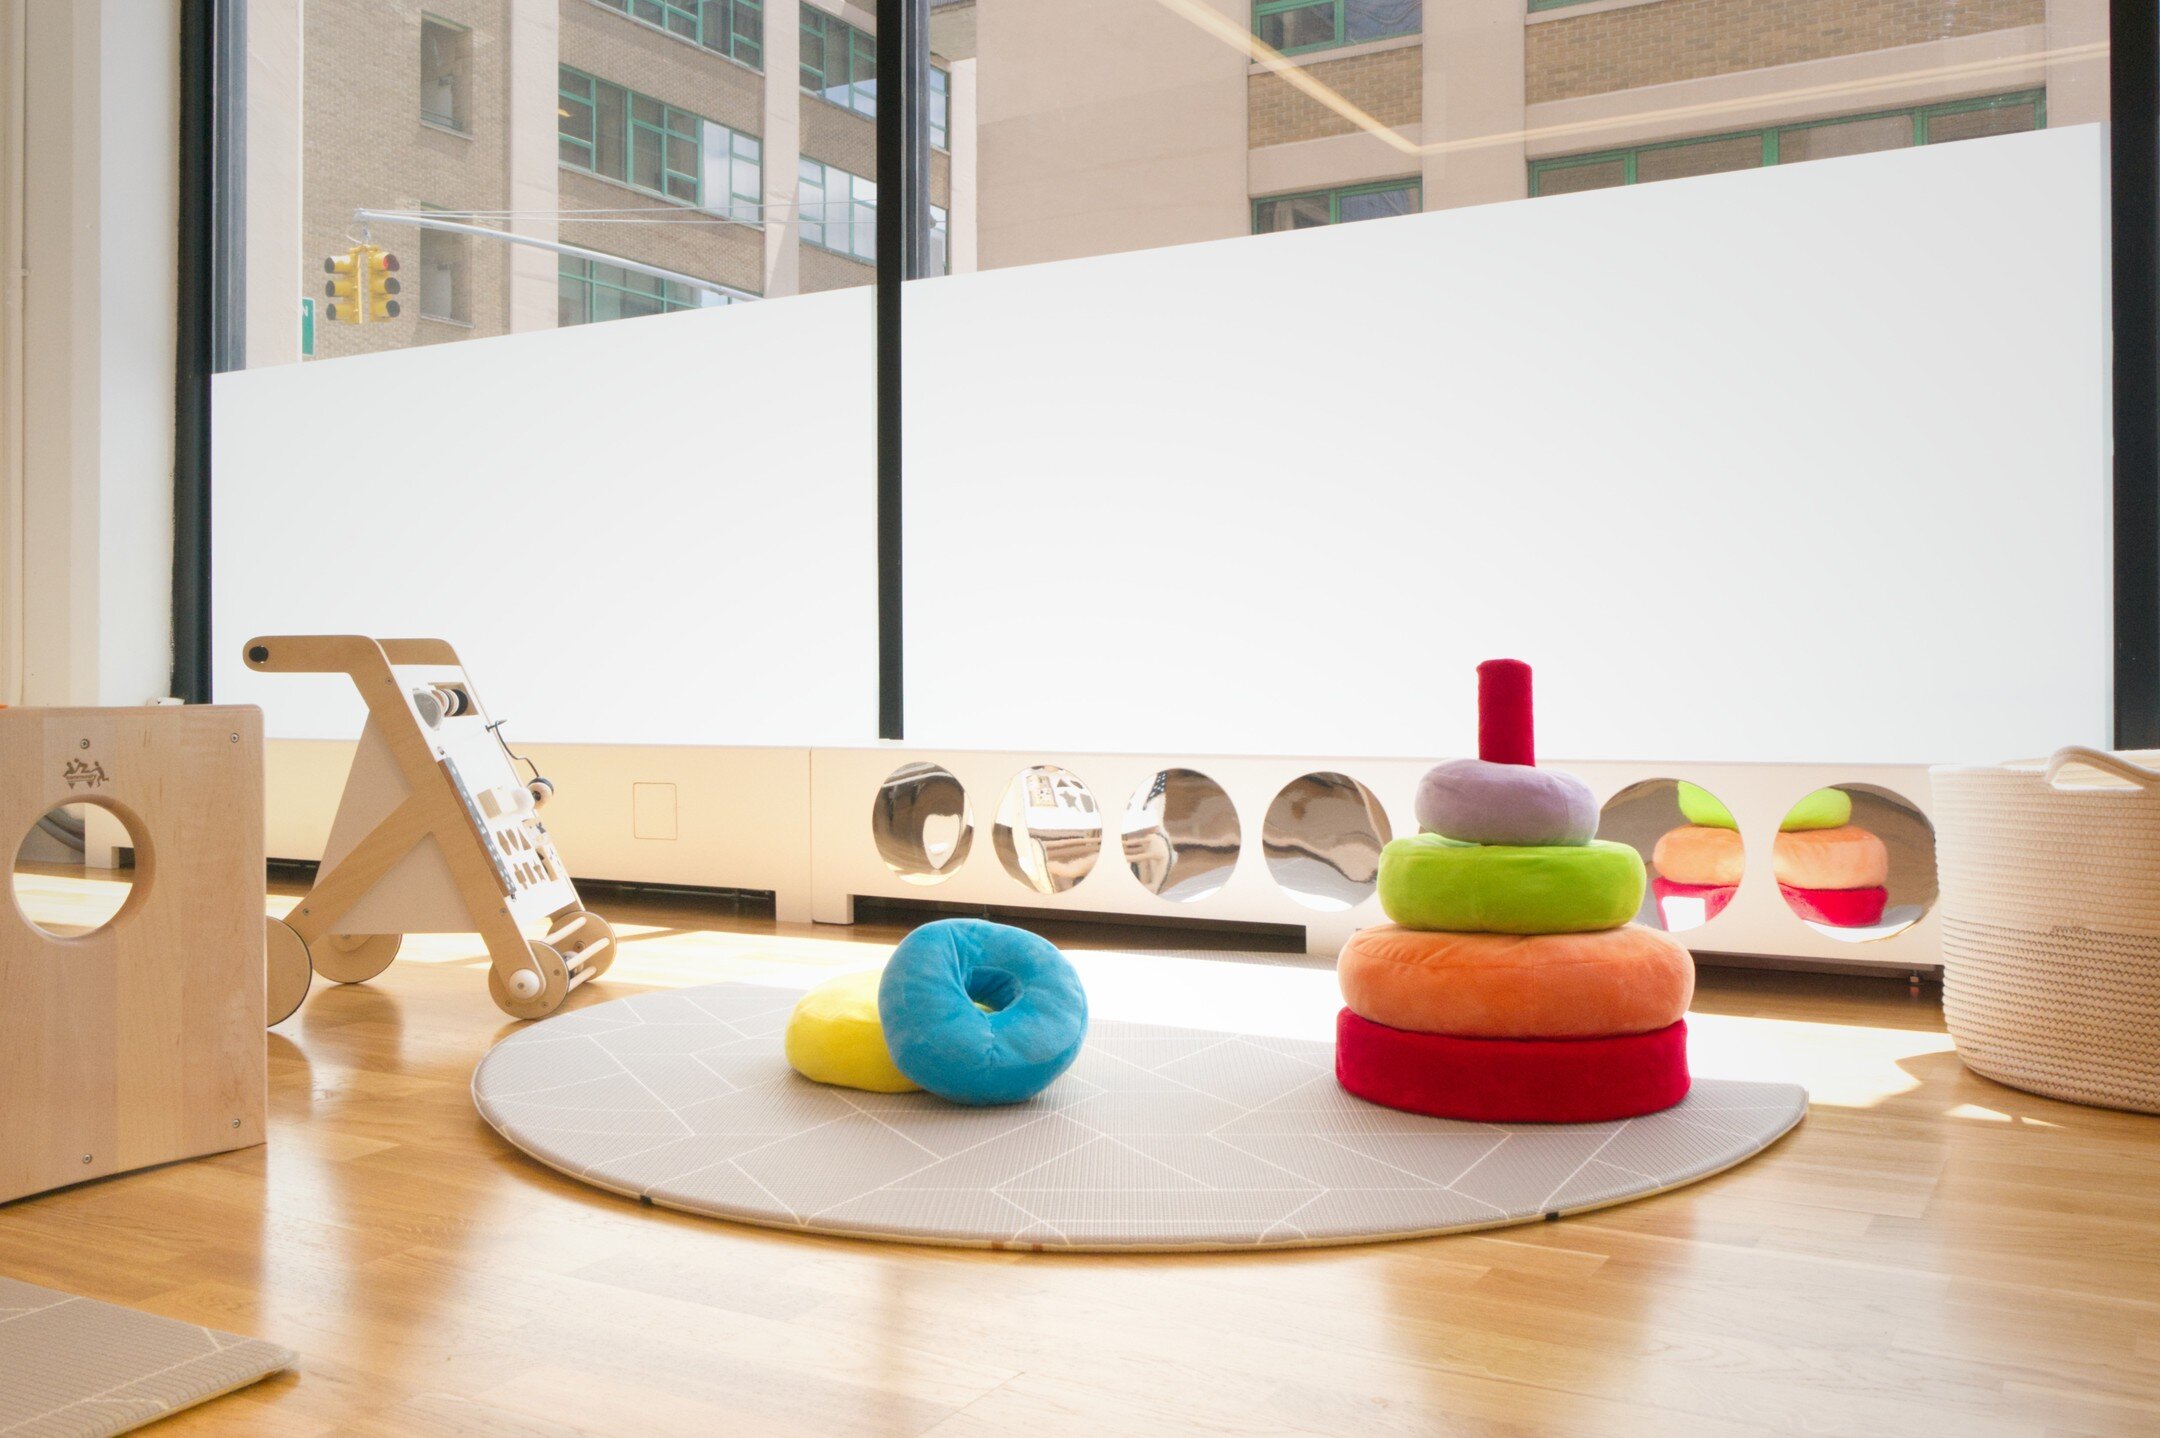 Design is in the Details! We create our school spaces to engage children at their height. This infant room inspires the littlest learners to investigate their environment and supports their sensory development.
.
.
.
.
.
#elevenofeleven #architecture